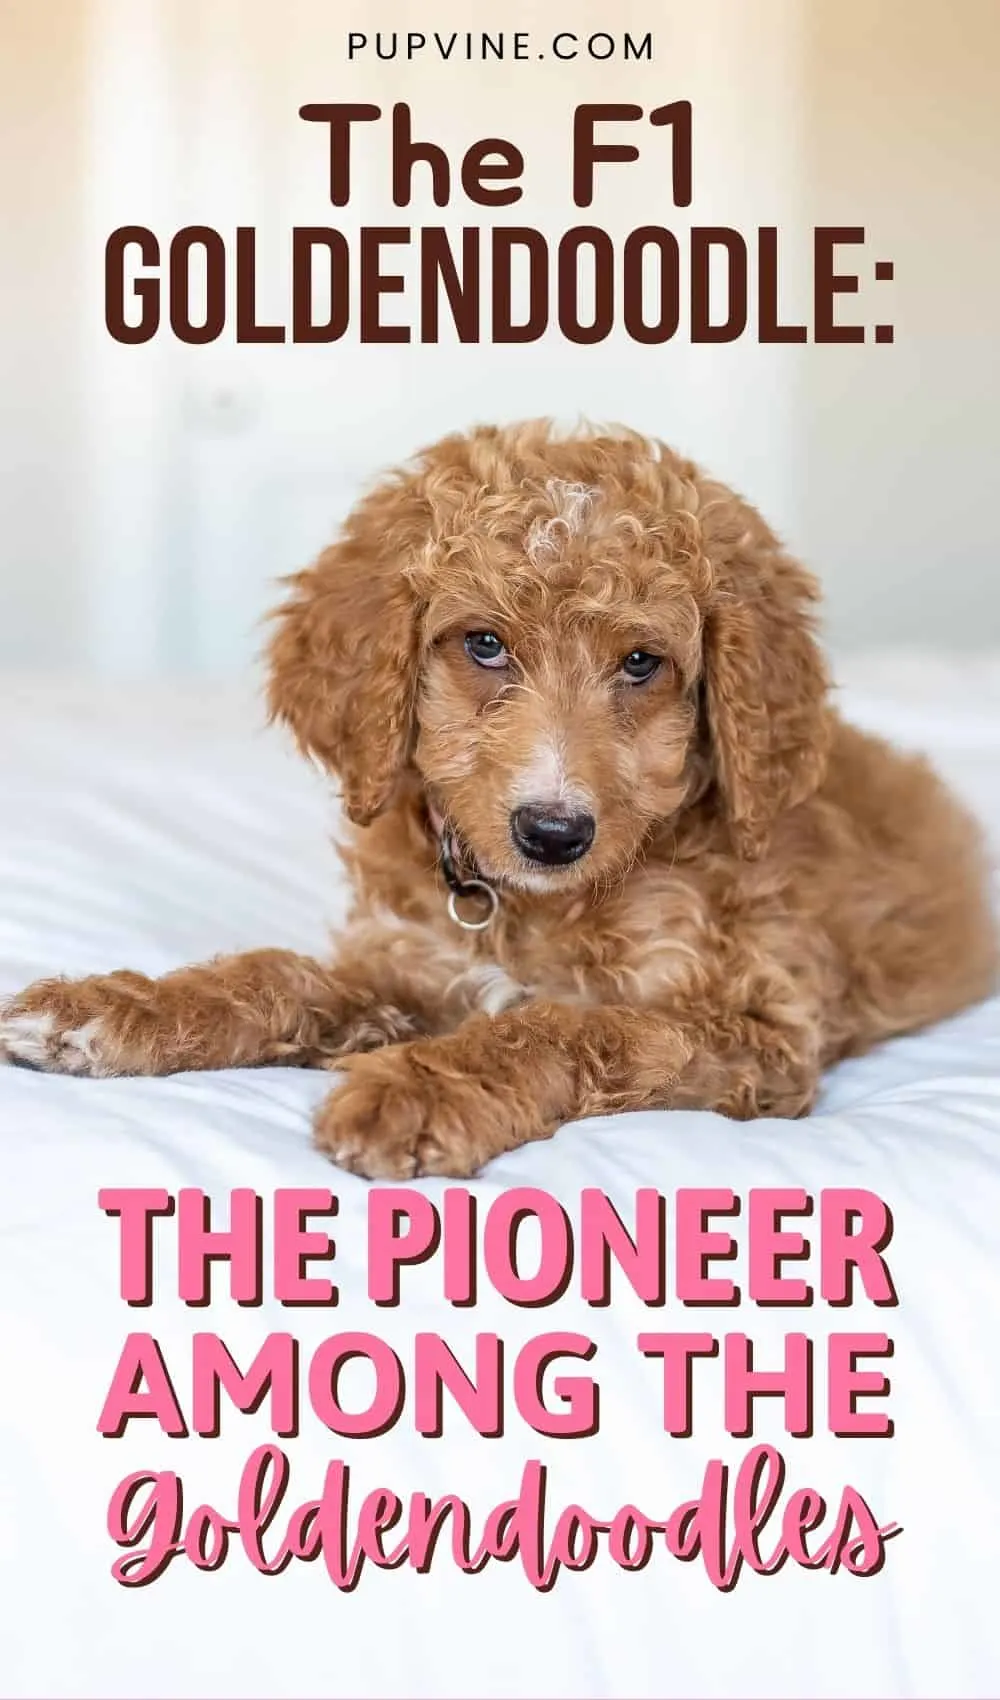 The F1 Goldendoodle: The Pioneer Among The Goldendoodles